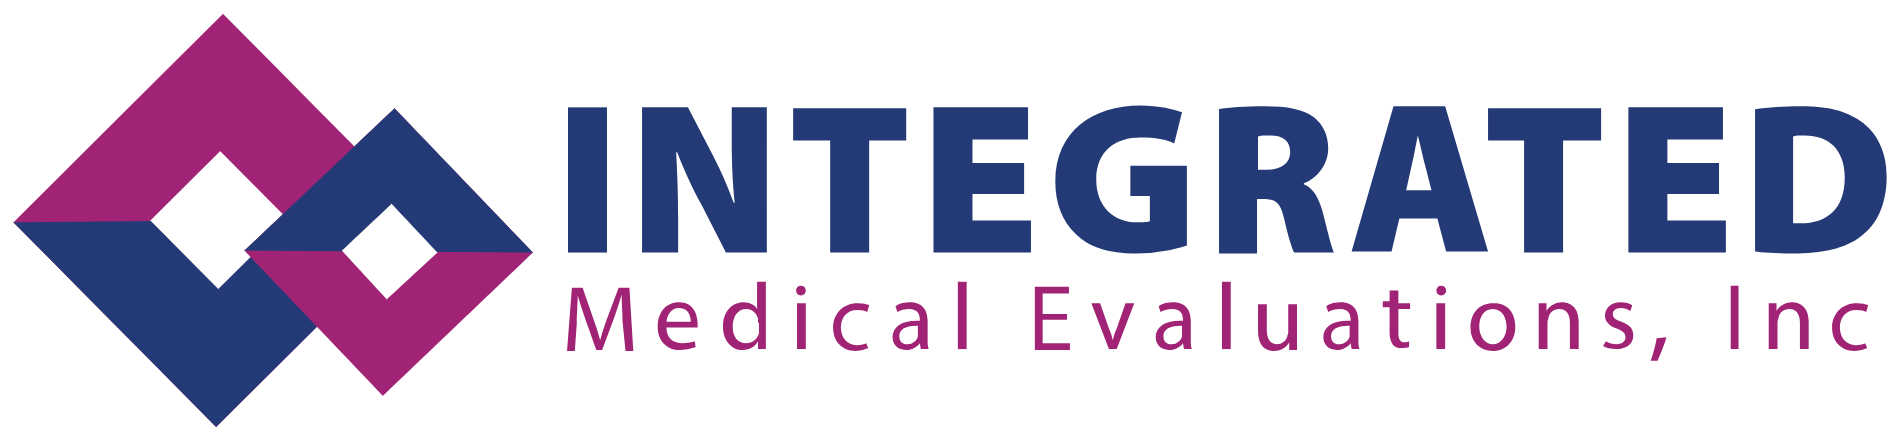 Integrated Medical Evaluations